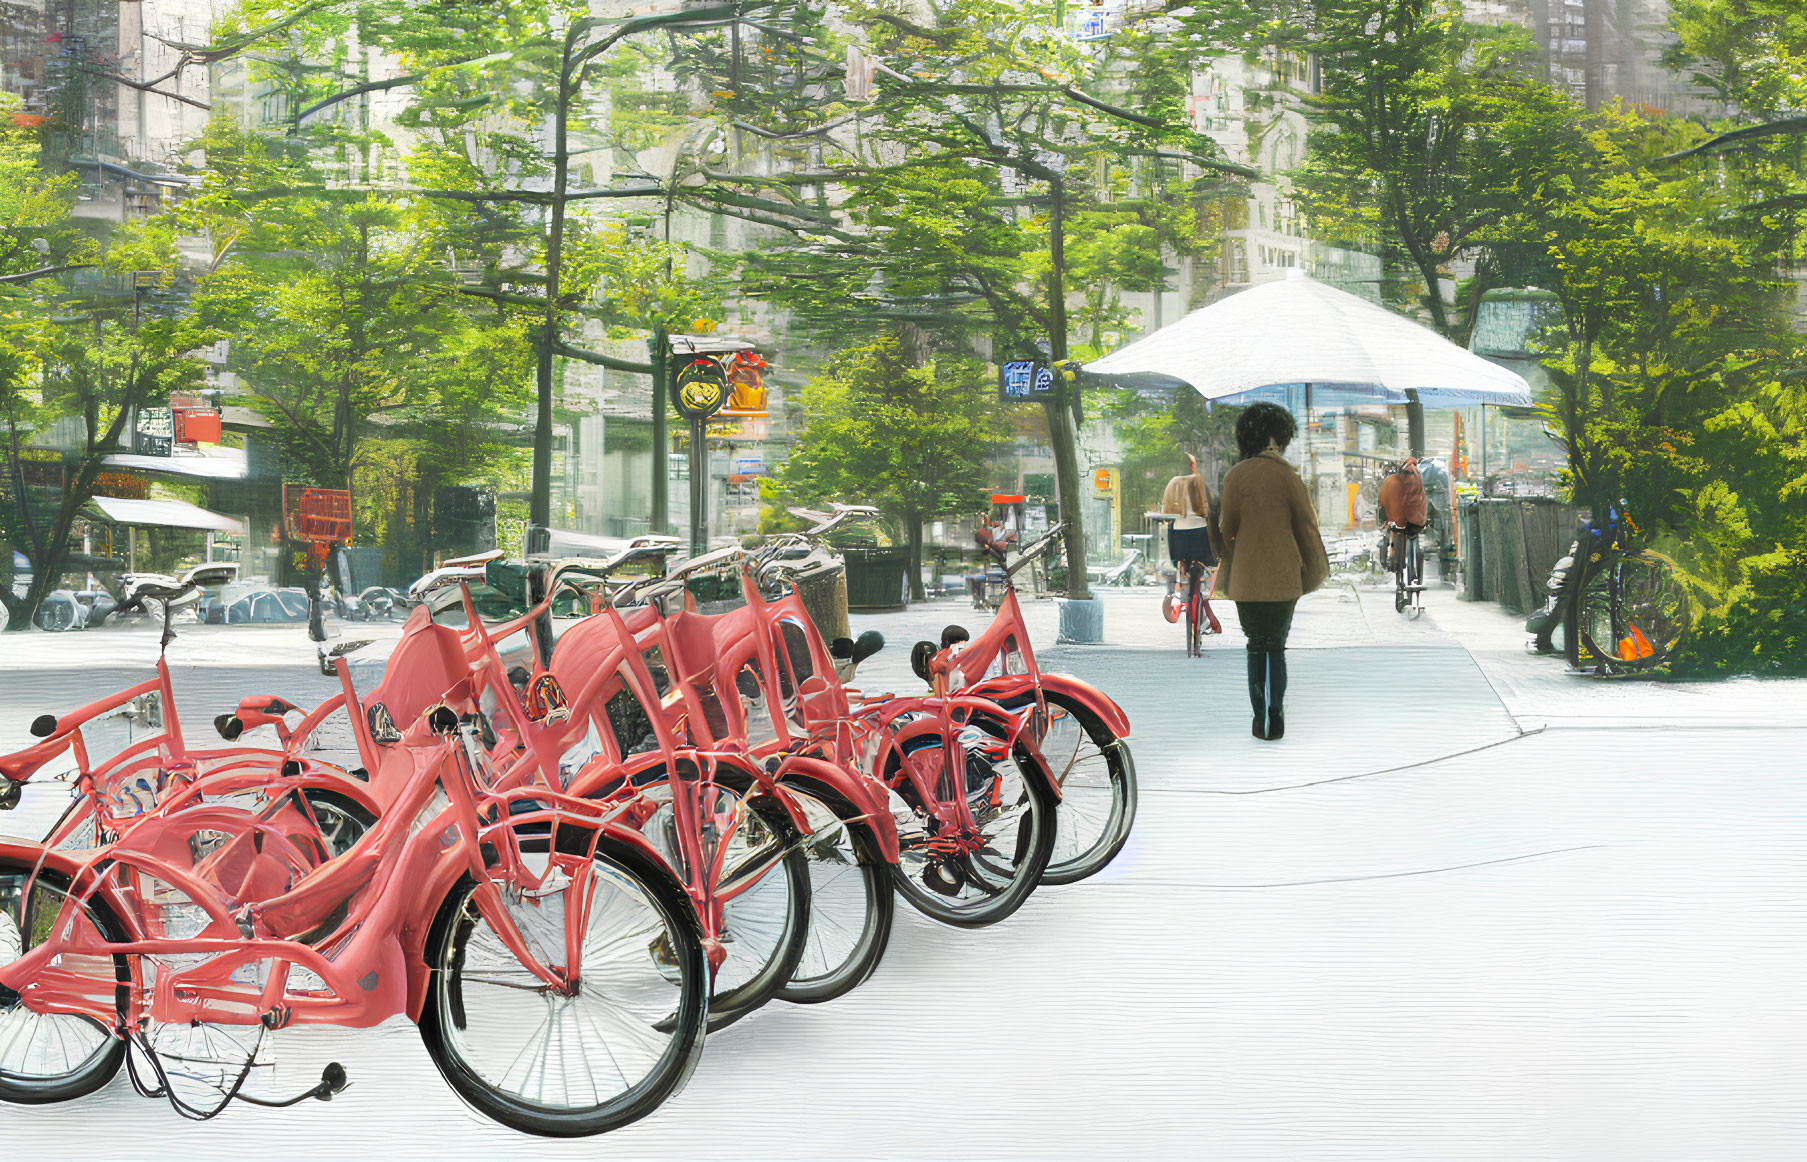 Pink bicycles lined up on city sidewalk with trees and pedestrian on sunny day